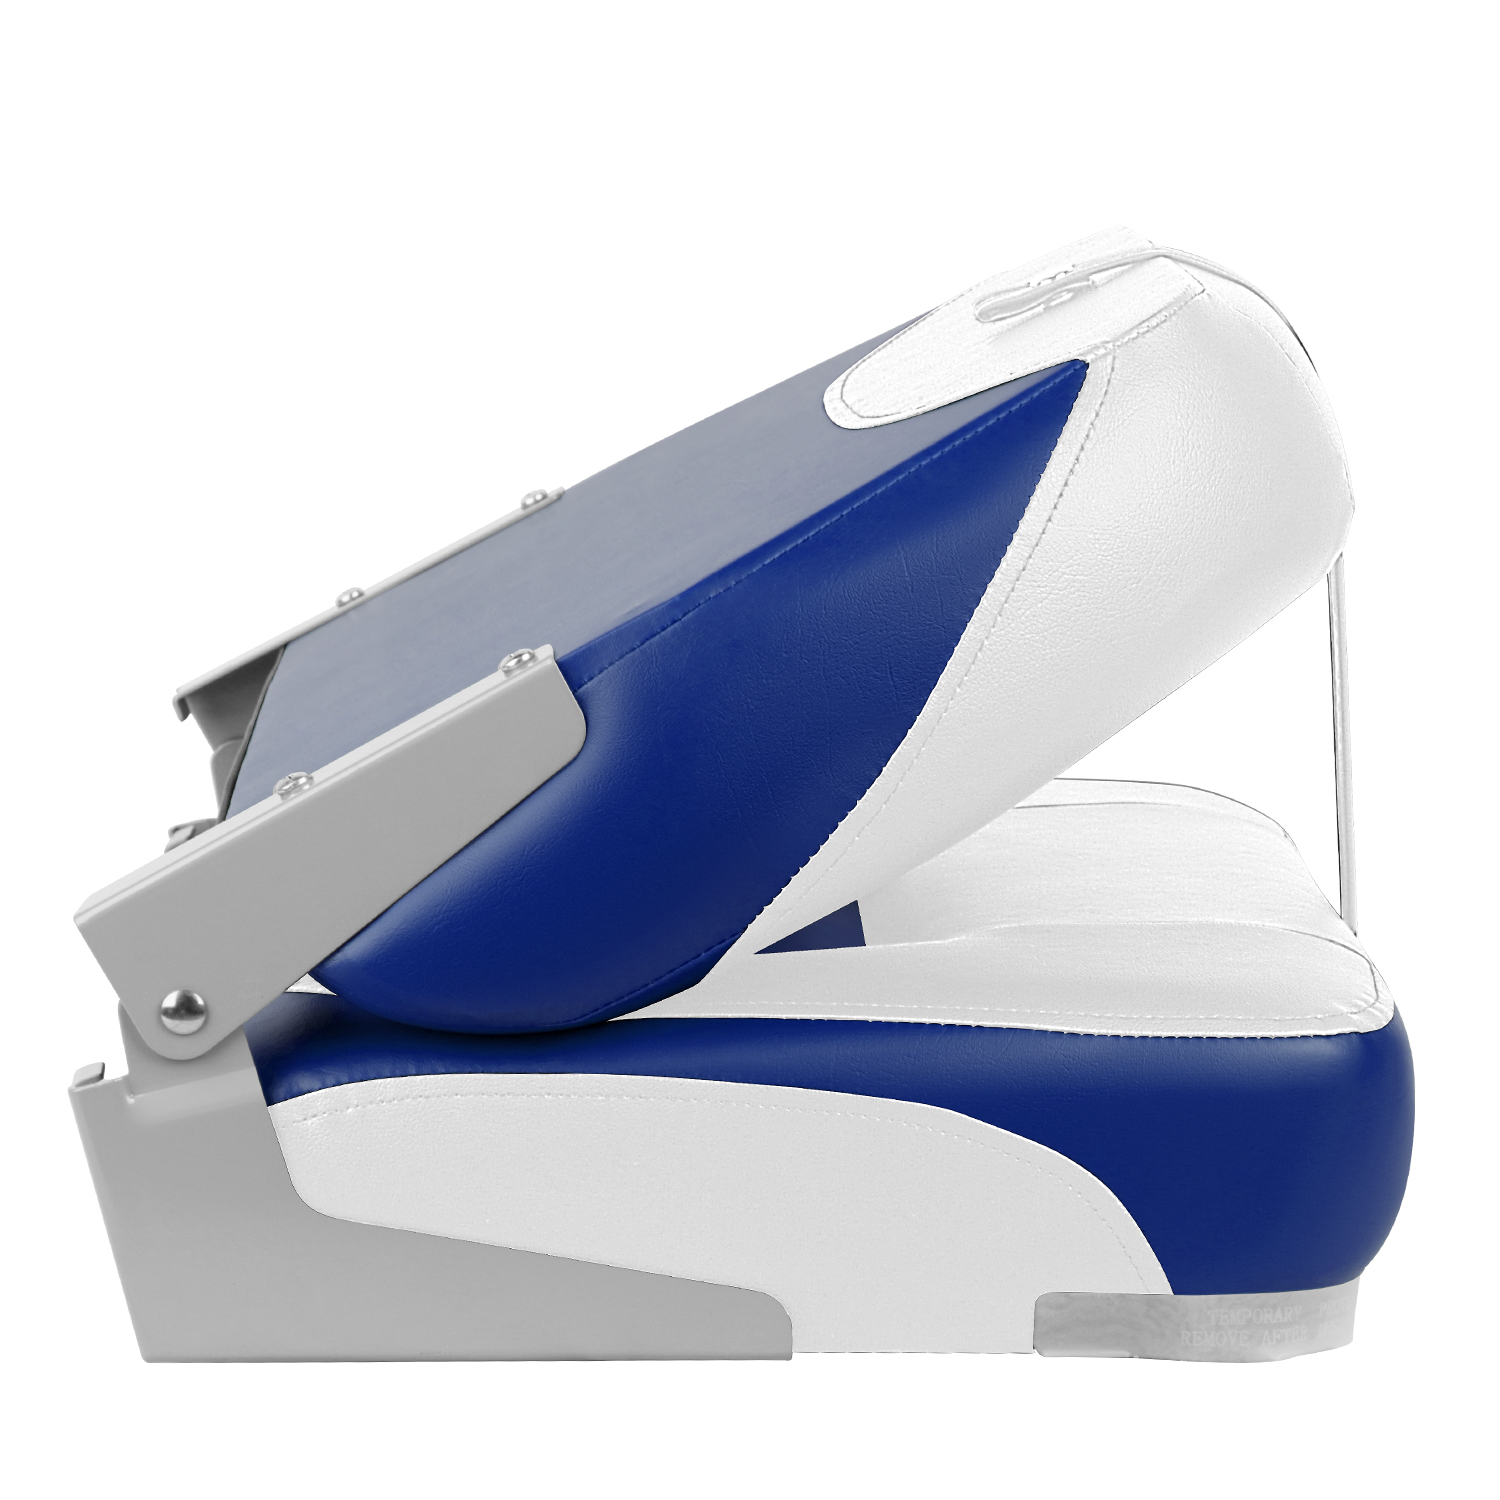 Leader Accessories New Elite Low Back Folding Fishing Boat Seat,White/Blue 